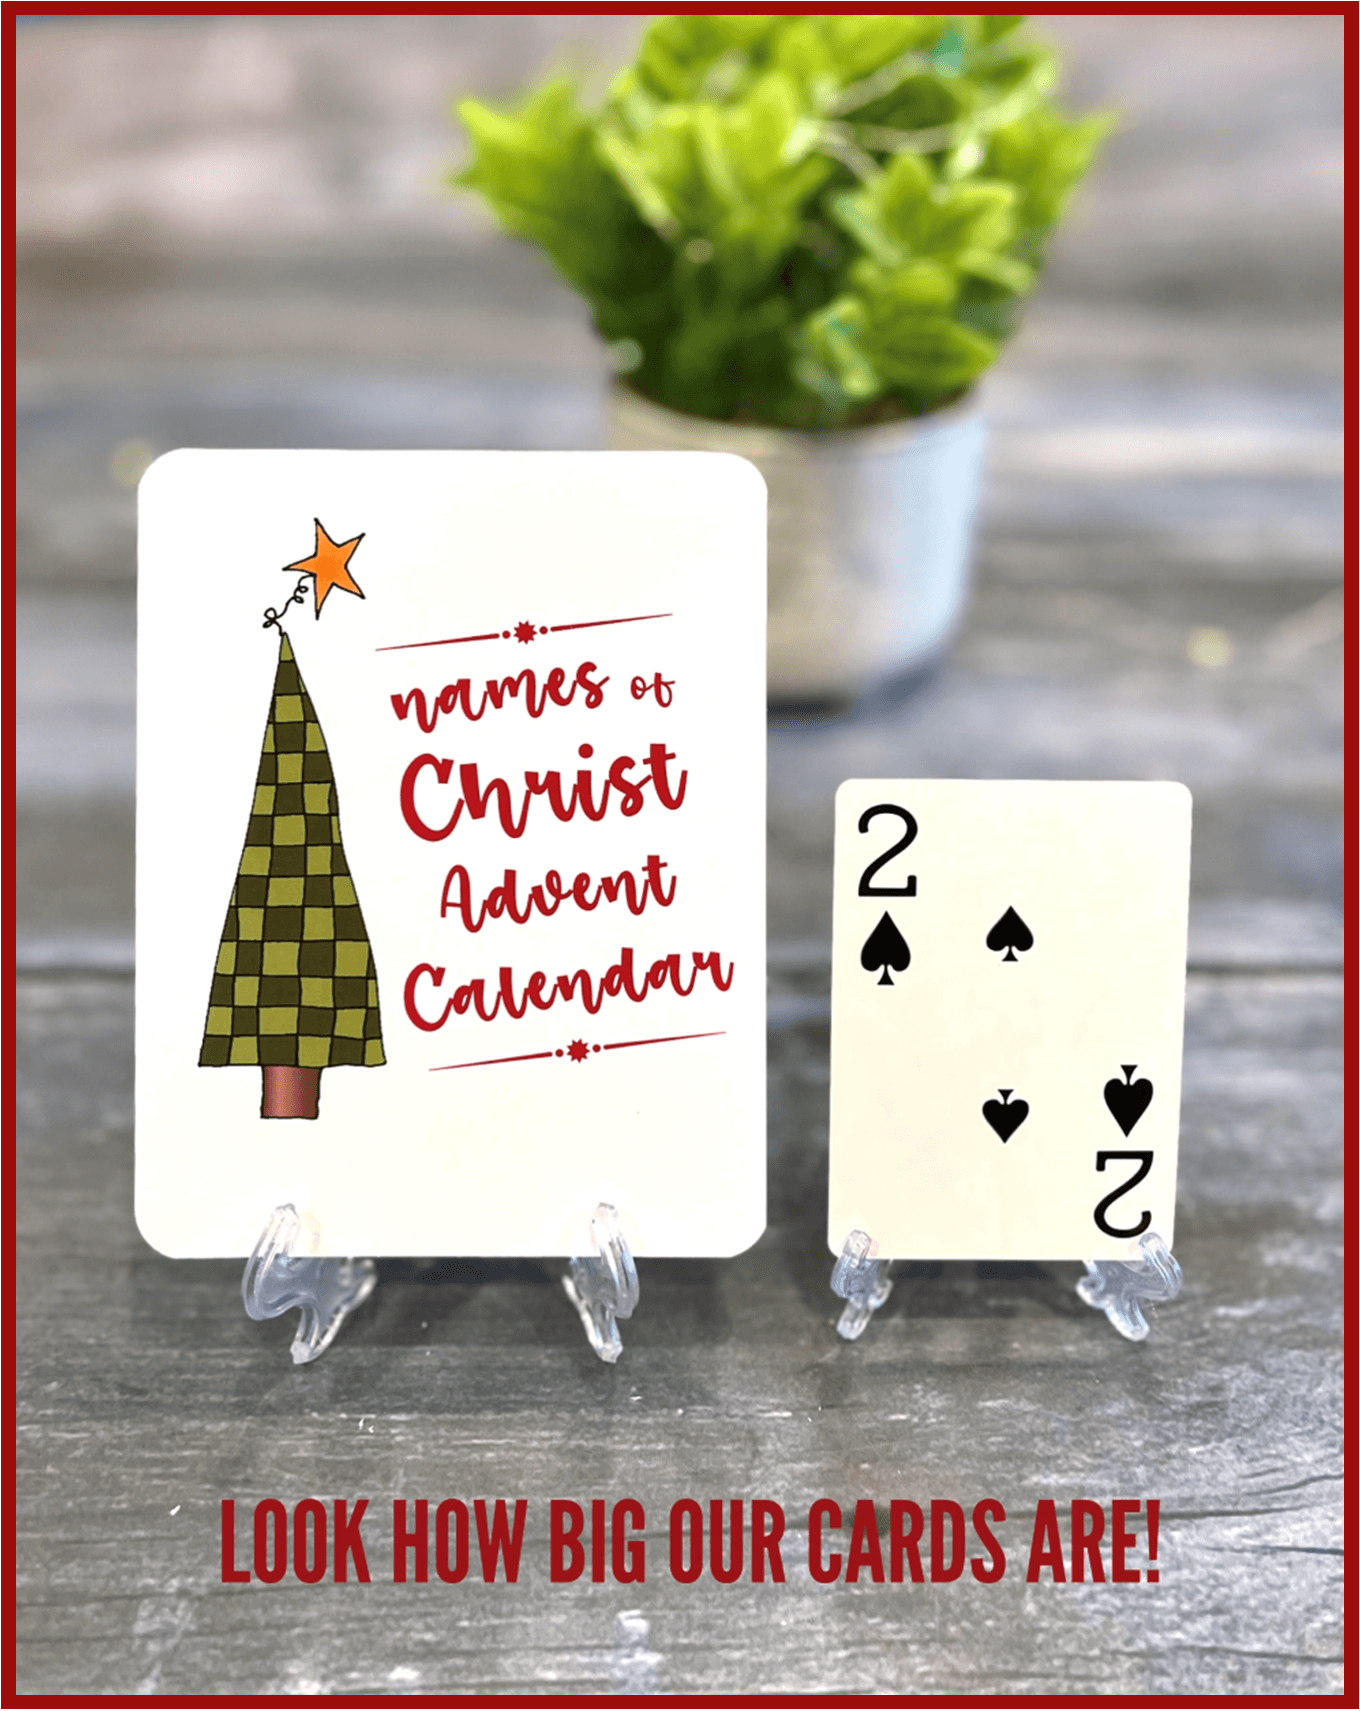 NAMES OF CHRIST ADVENT CALENDAR SET OF 26 CARDS W/PLASTIC EASEL -- BOOK OF MORMON AND BIBLE (KING JAMES)